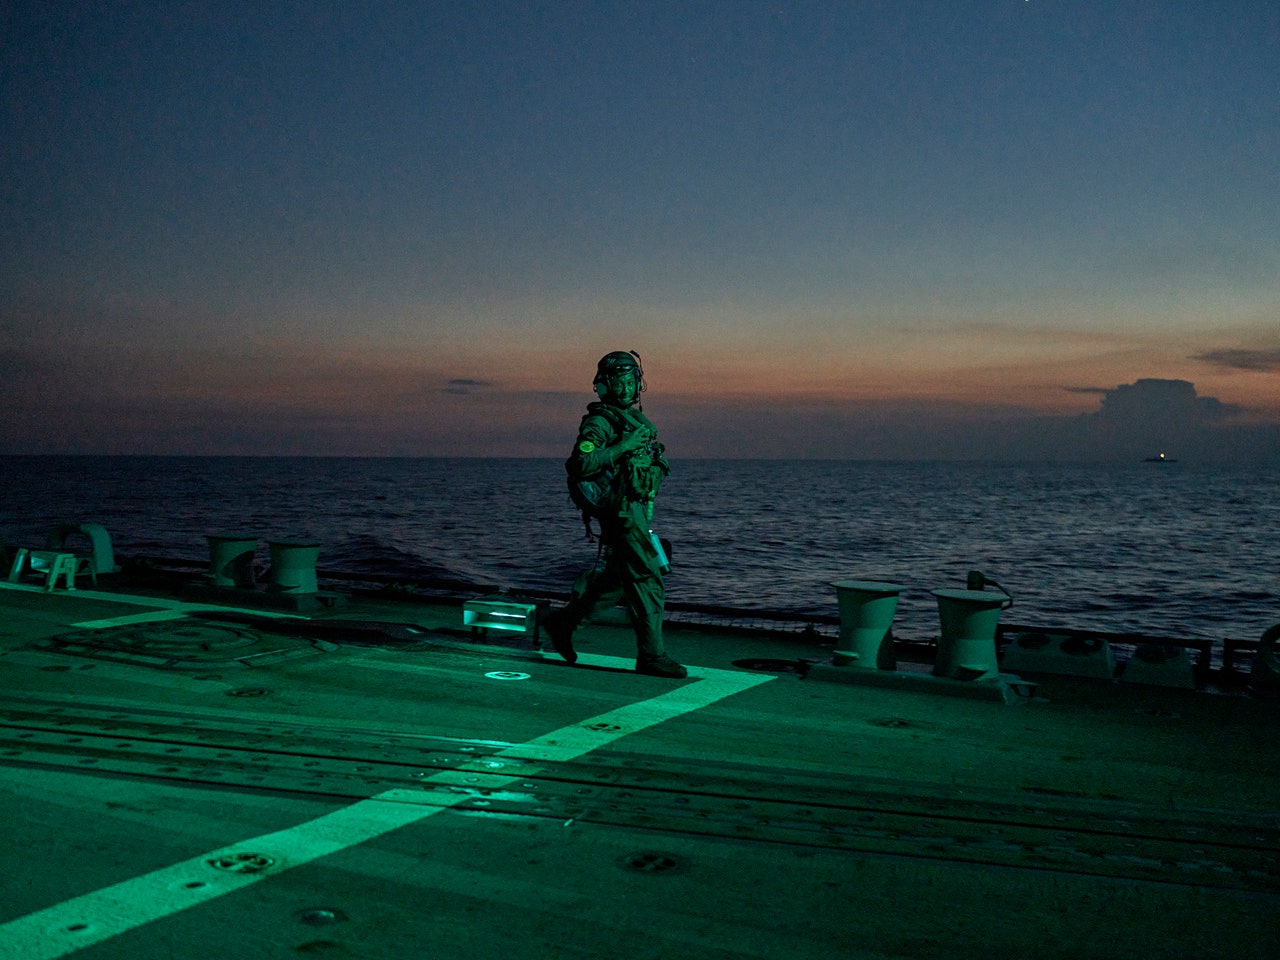 Crossing the Taiwan Strait with the U.S. Navy